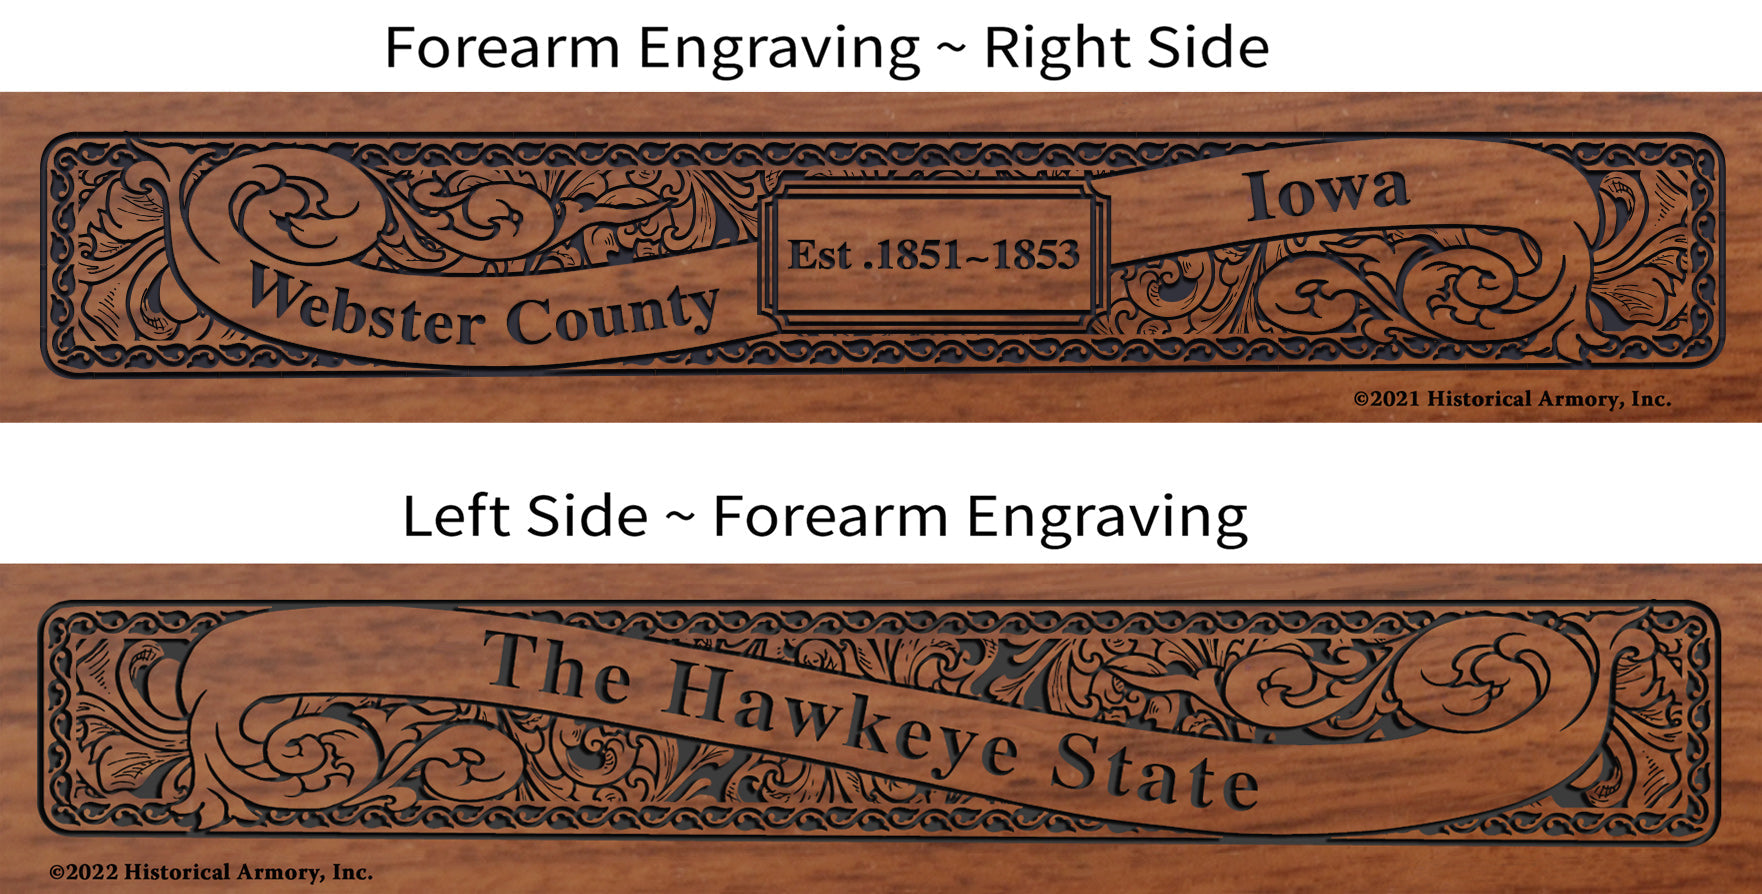 Webster County Iowa Engraved Rifle Forearm